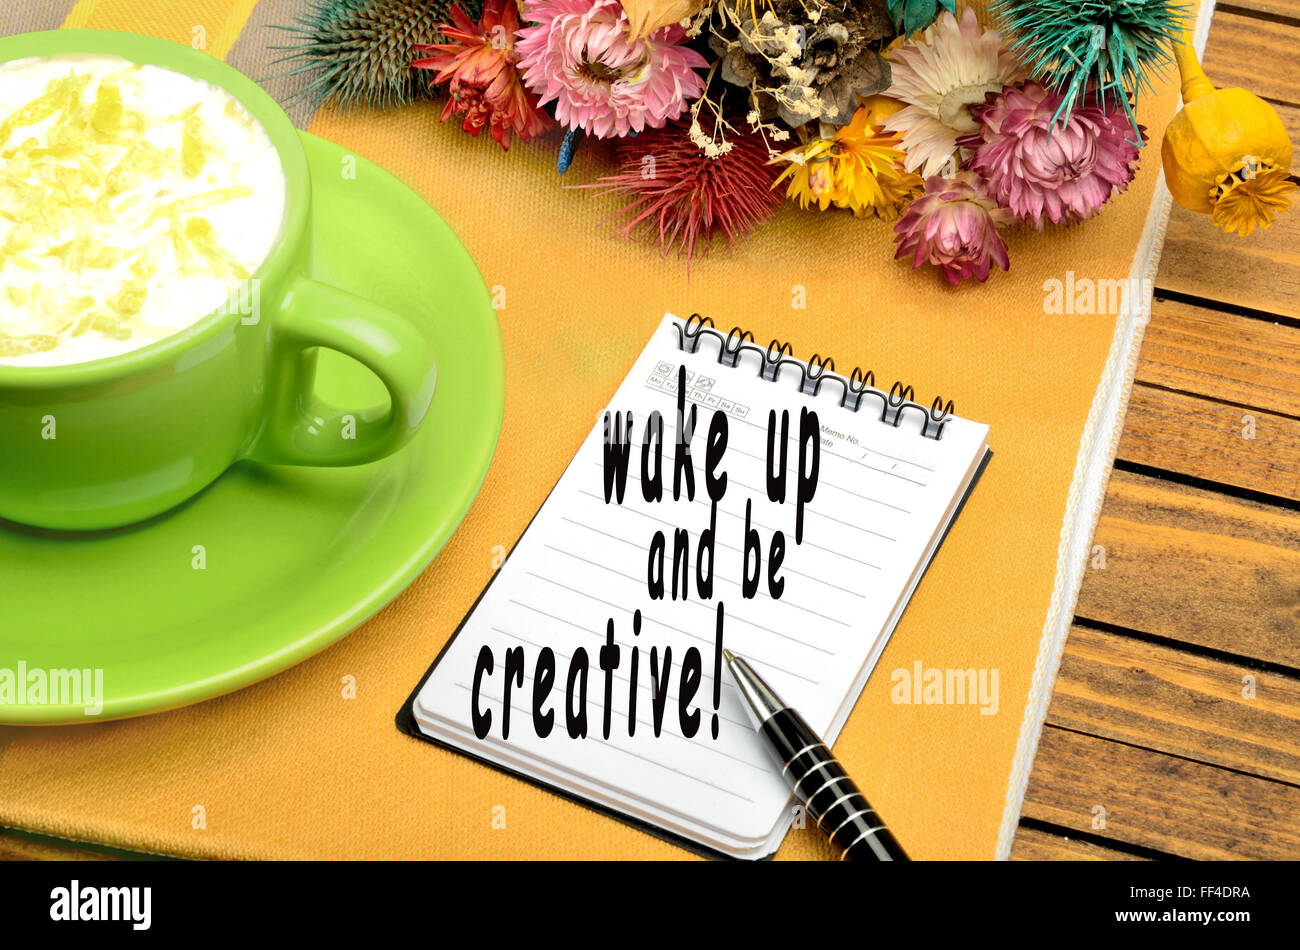 Wake up and be creative written on notebook Stock Photo